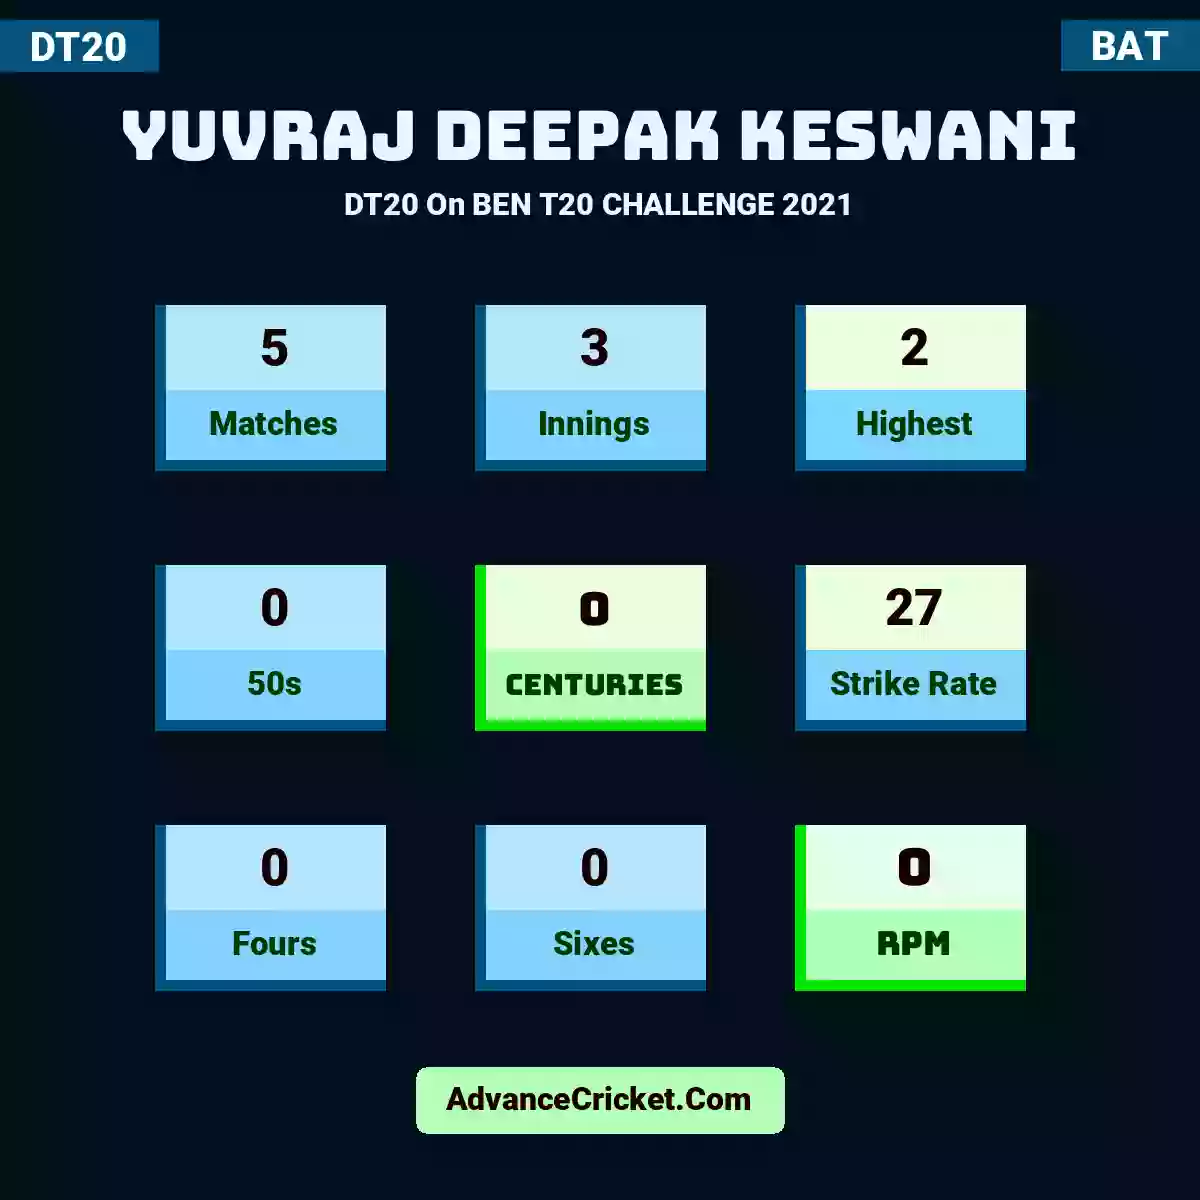 Yuvraj Deepak Keswani DT20  On BEN T20 CHALLENGE 2021, Yuvraj Deepak Keswani played 5 matches, scored 2 runs as highest, 0 half-centuries, and 0 centuries, with a strike rate of 27. Y.Keswani hit 0 fours and 0 sixes, with an RPM of 0.